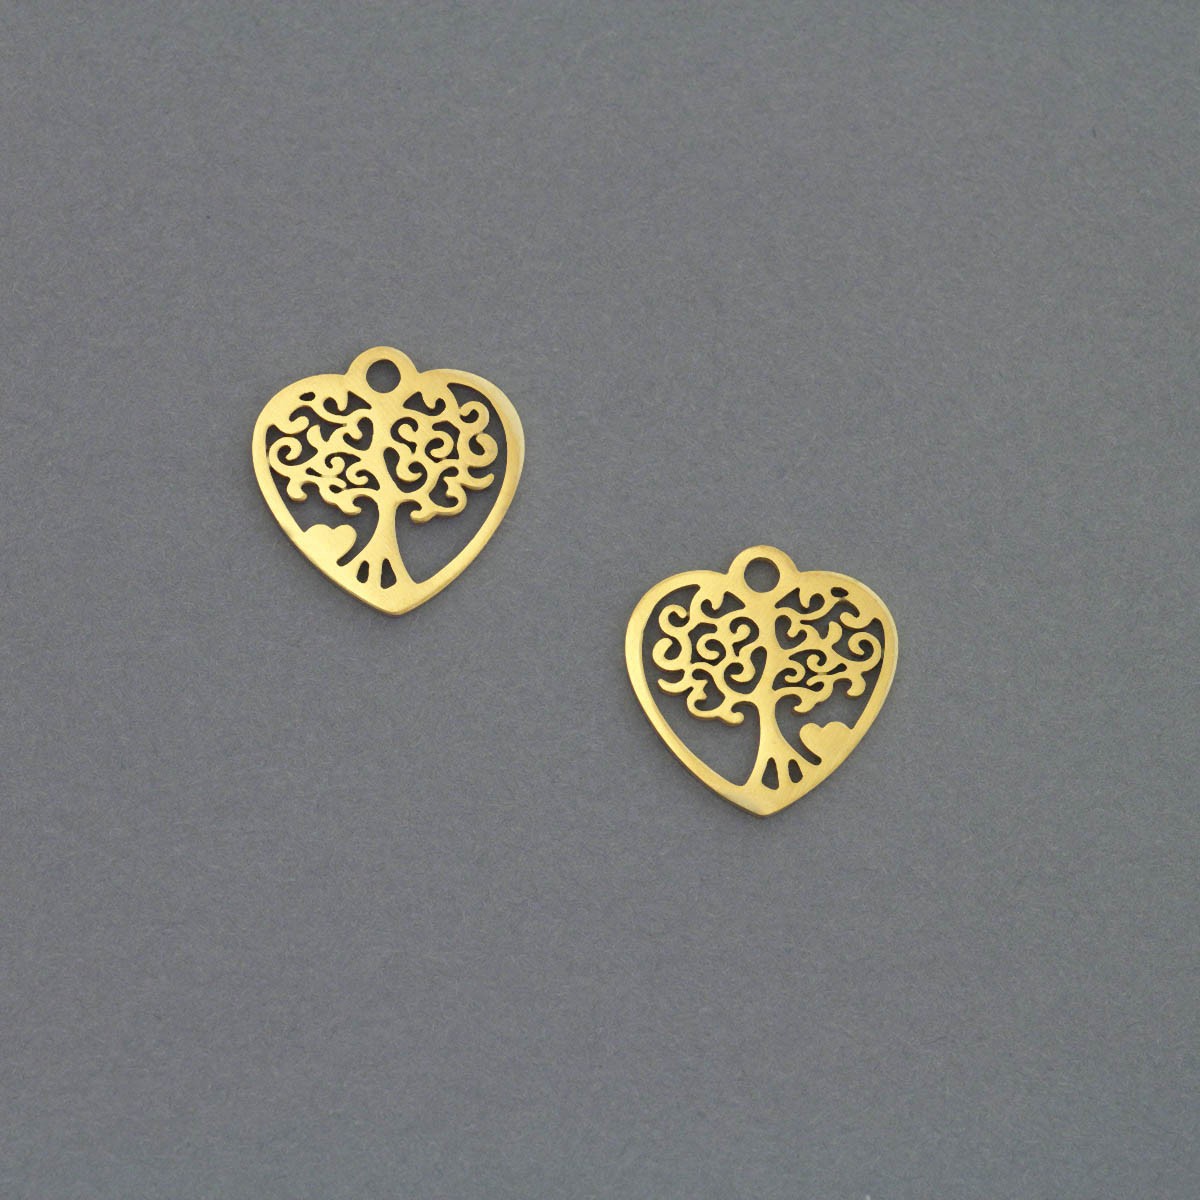 Tree of life pendant / surgical steel gold-plated / 15mm 1pc AKGSCH005